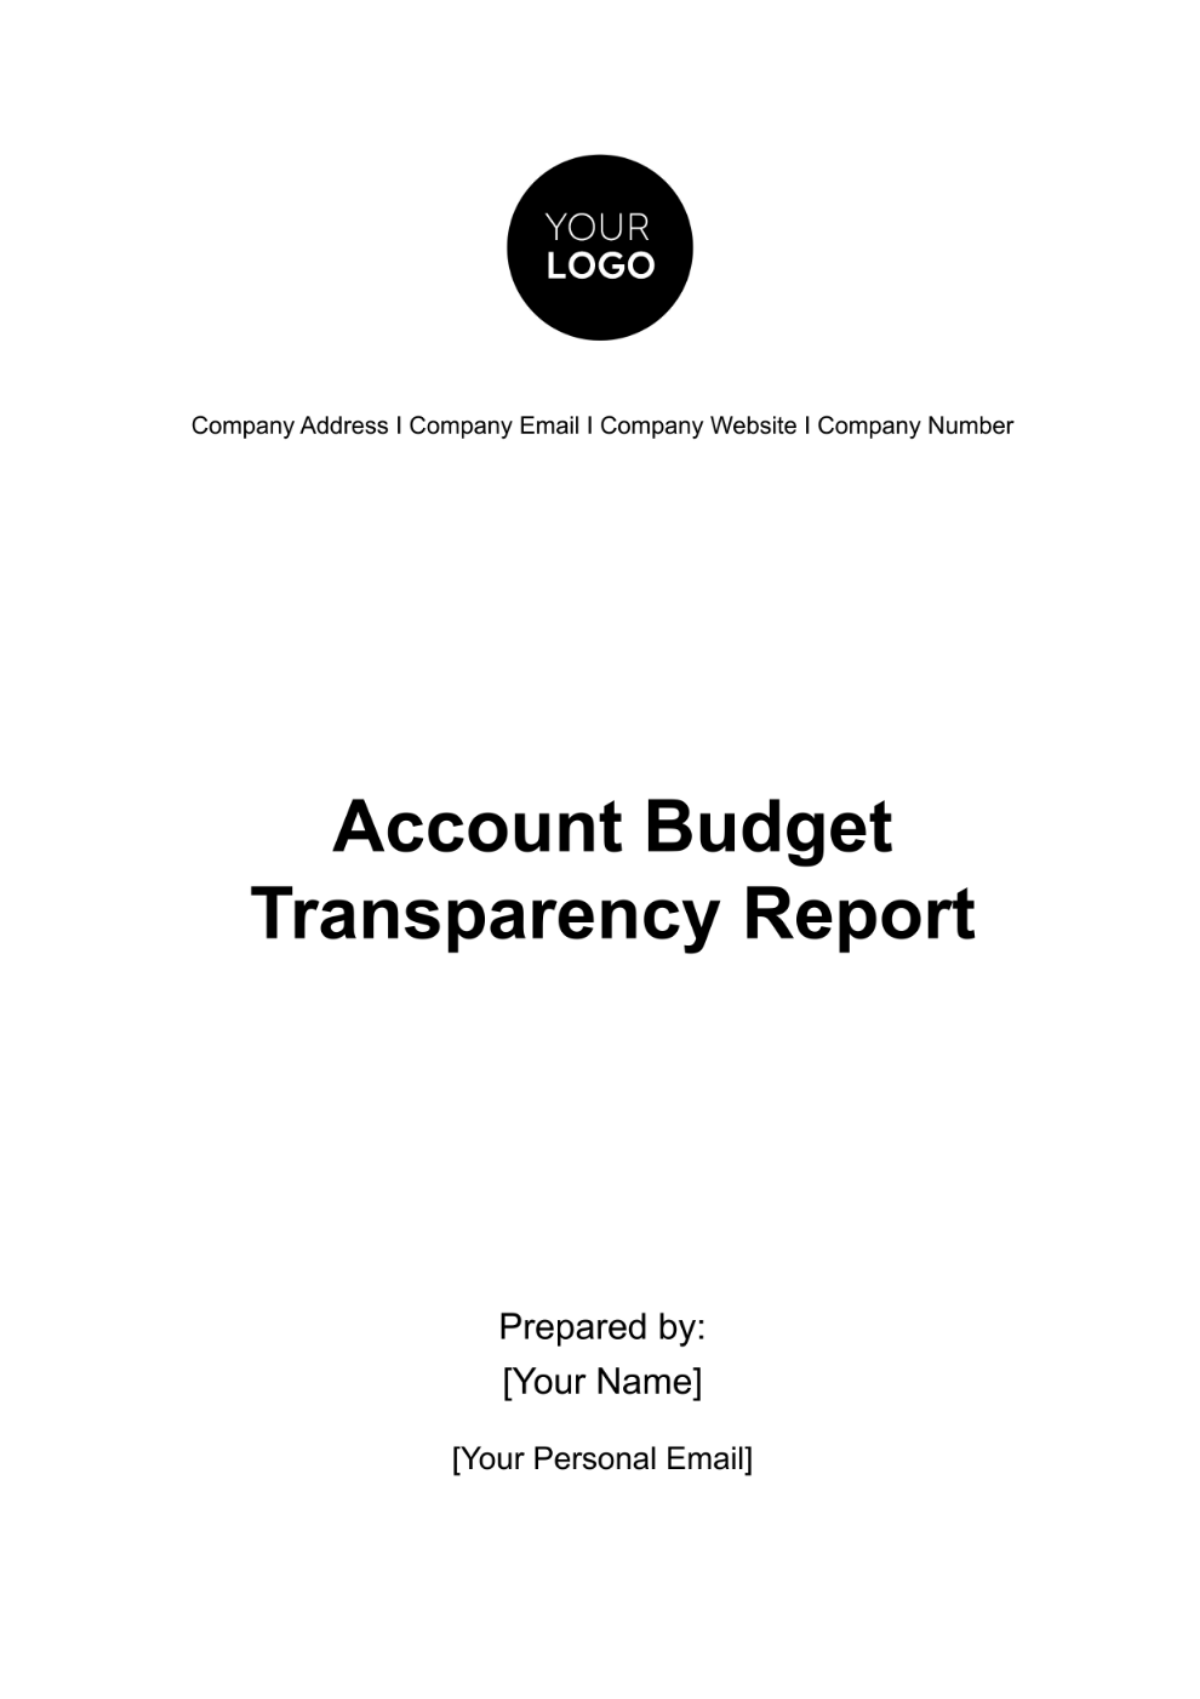 Account Budget Transparency Report Template